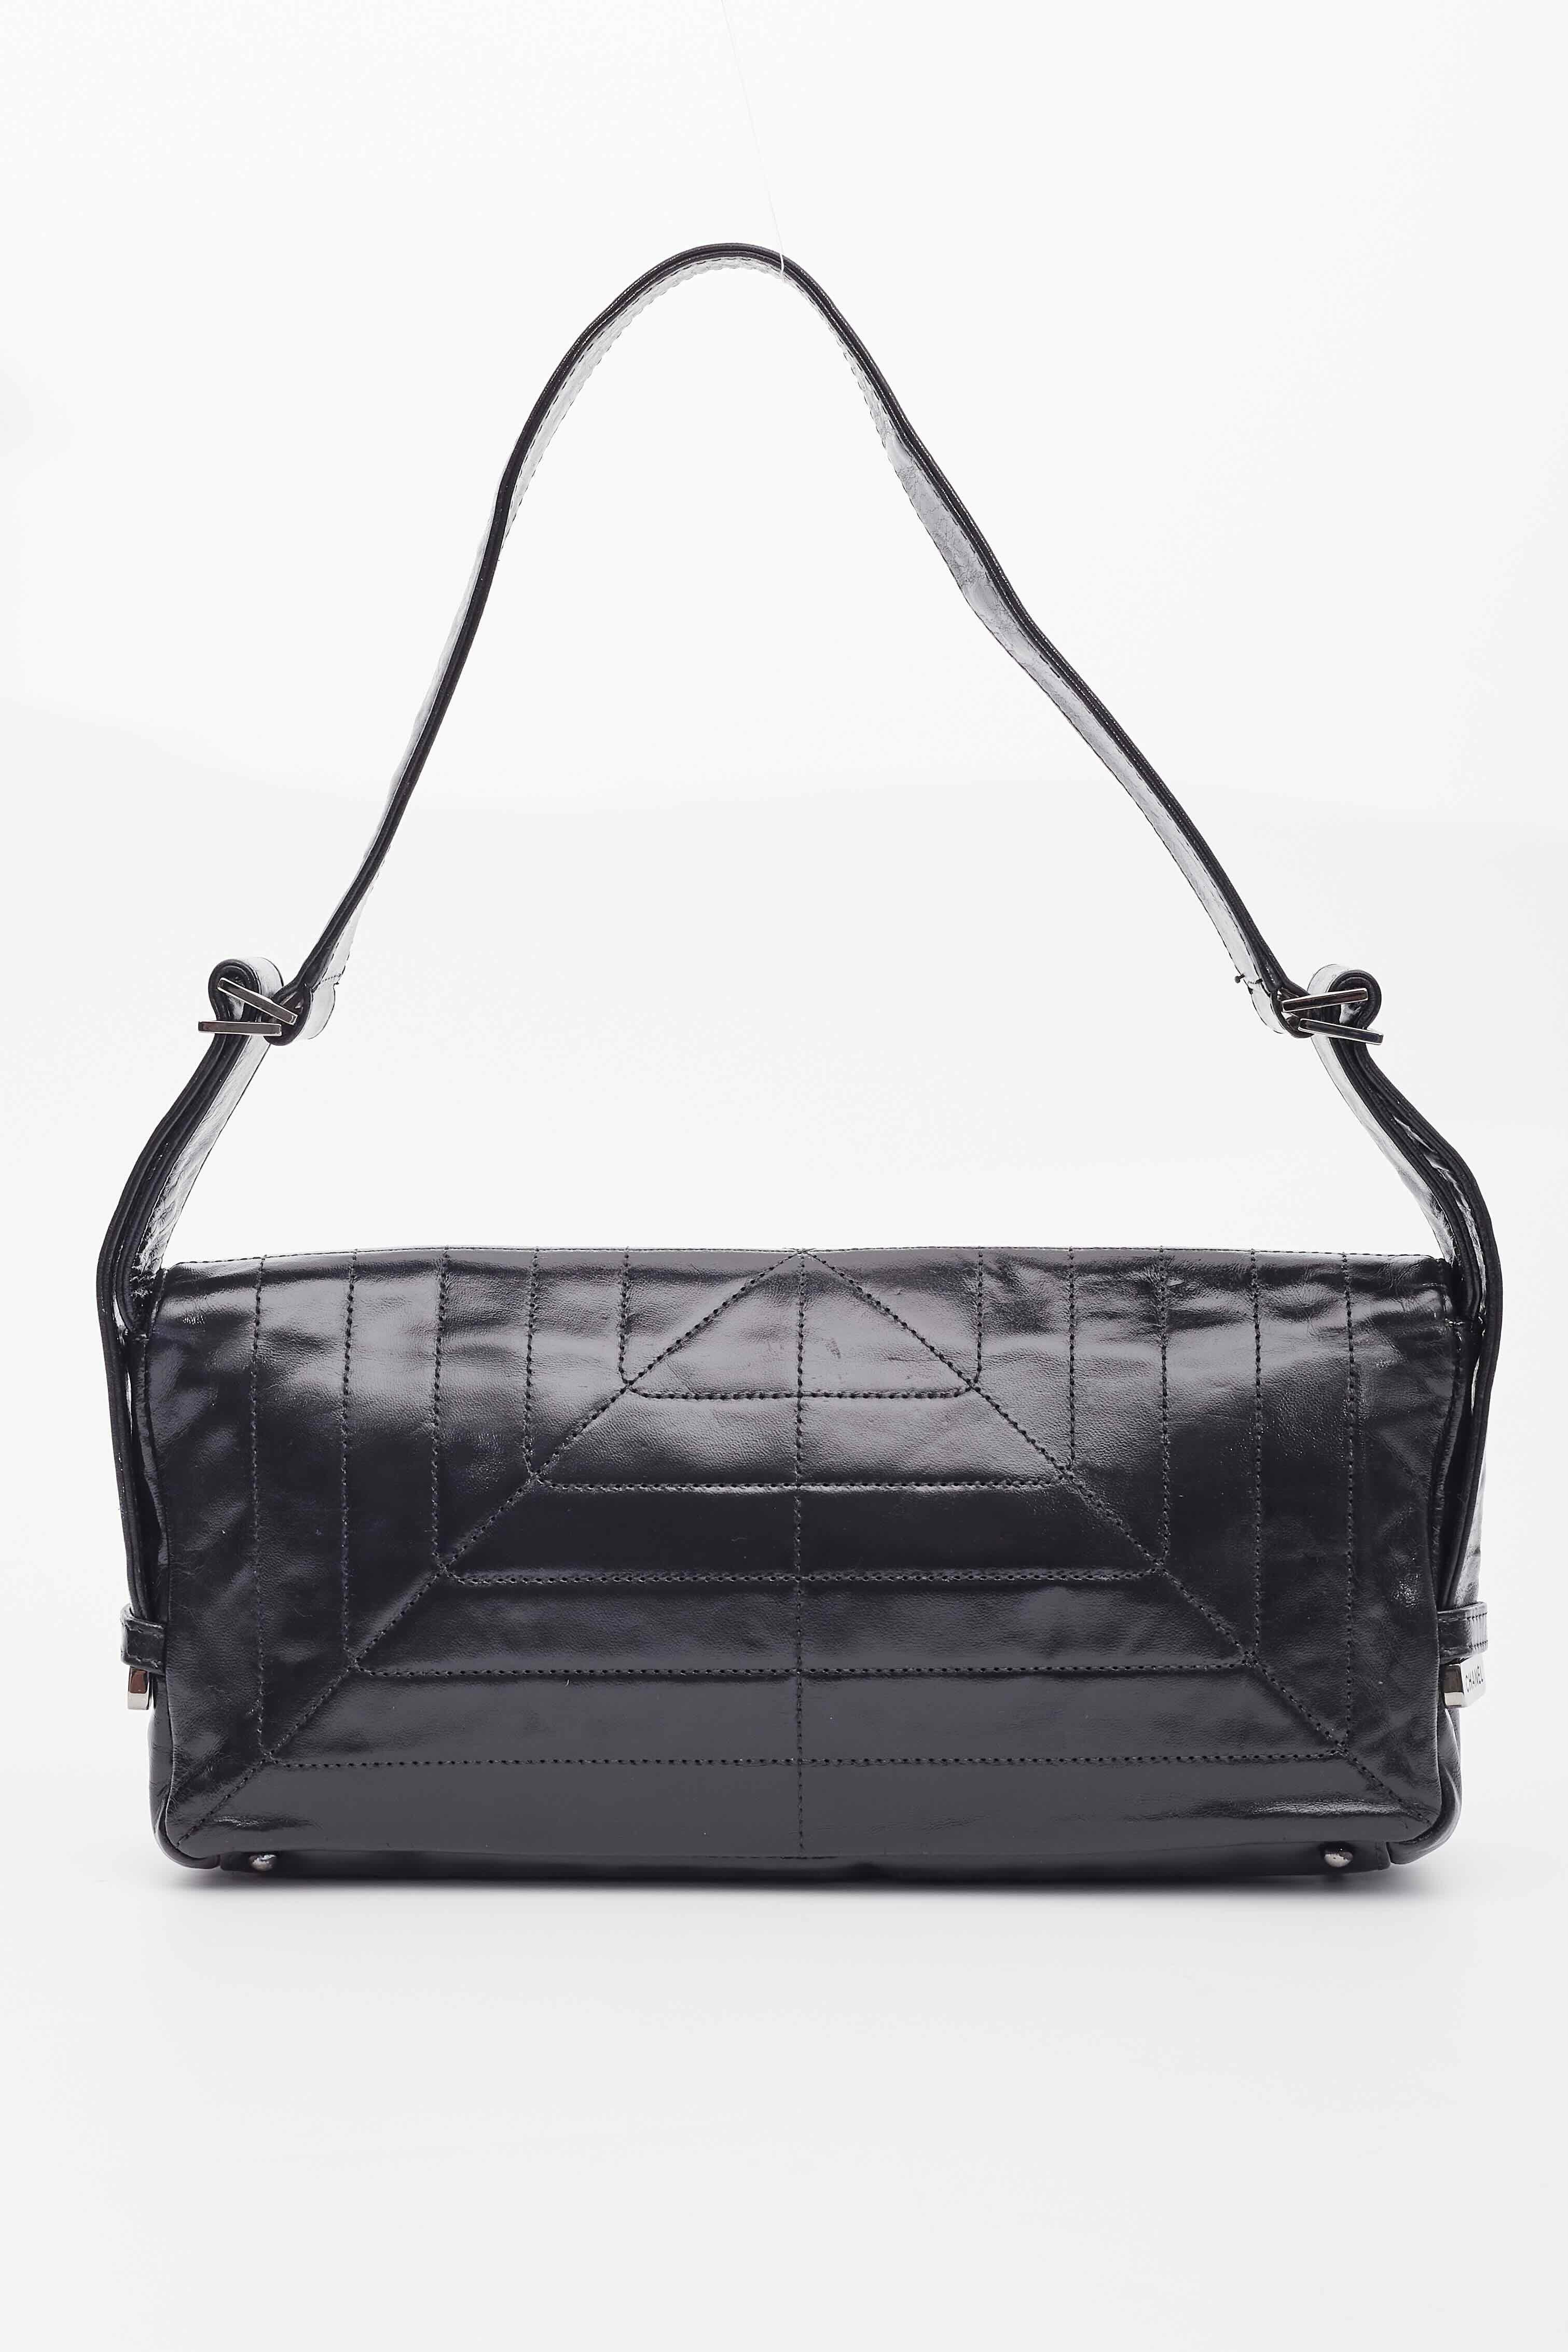 Color: Black
Material: Lambskin
Serial code: 8739003
Comes with dust bag.
Condition: Good. Faint scratches and marks to interior.

Made in Italy